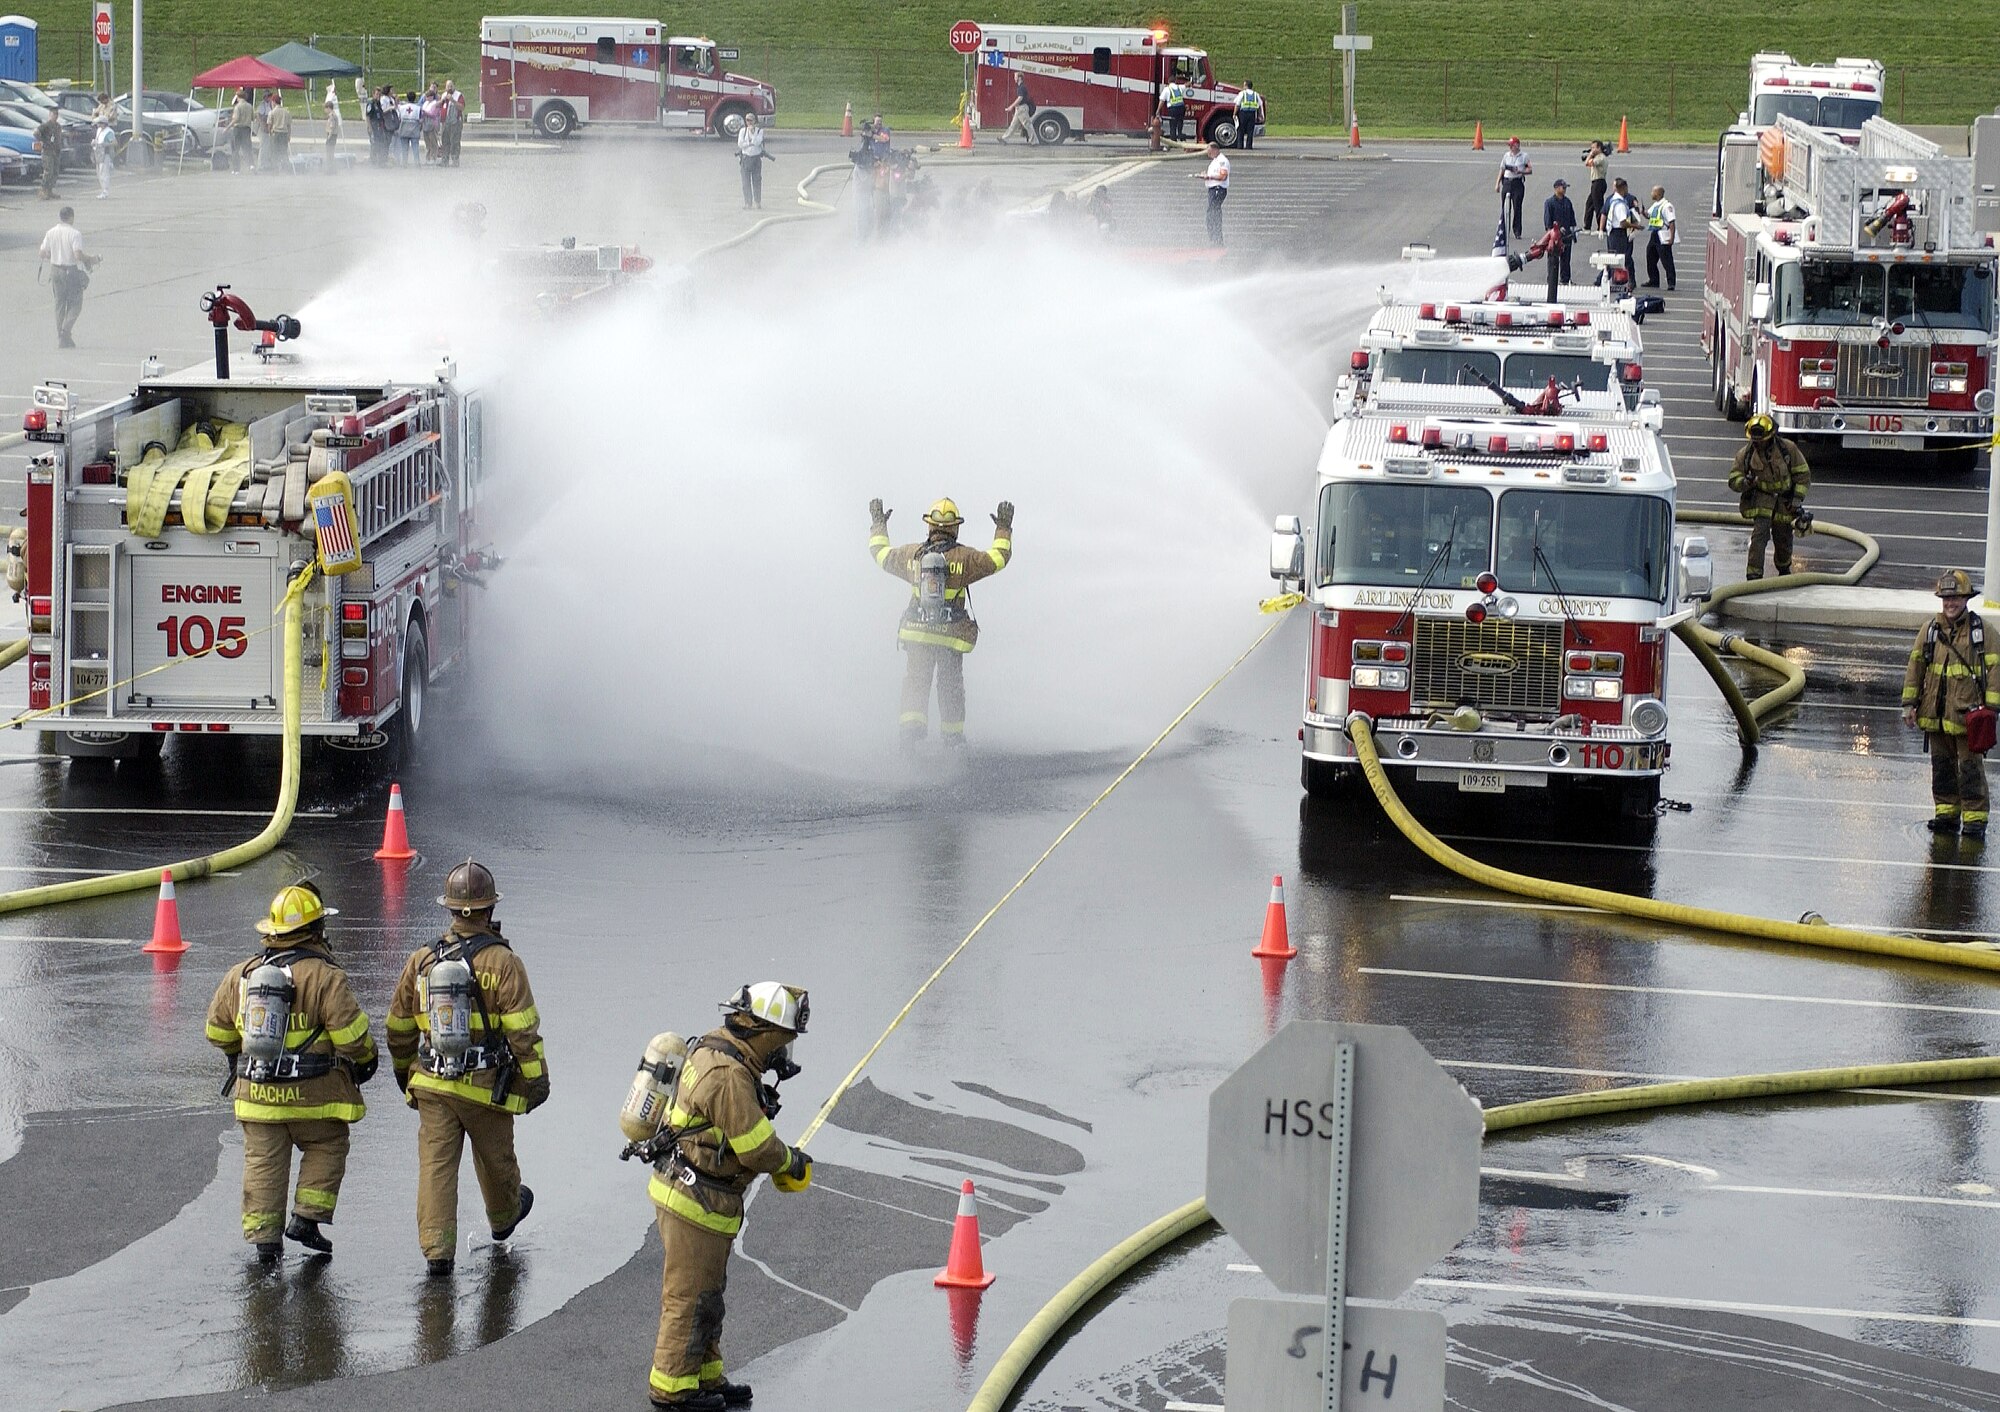 WASHINGTON -- Firefighters from Arlington County, Va., set up a decontamination area in the Pentagon's south parking lot during exercise Gallant Fox on July 24.  Gallant Fox is a large-scale chemical, biological, radiological and nuclear-training exercise conducted by the Pentagon Force Protection Agency.  The exercise provides training in responding to real-world mass casualty scenarios by various local emergency fire, police, medical and hazardous-material response units.  (U.S. Air Force photo by Master Sgt. Jim Varhegyi)